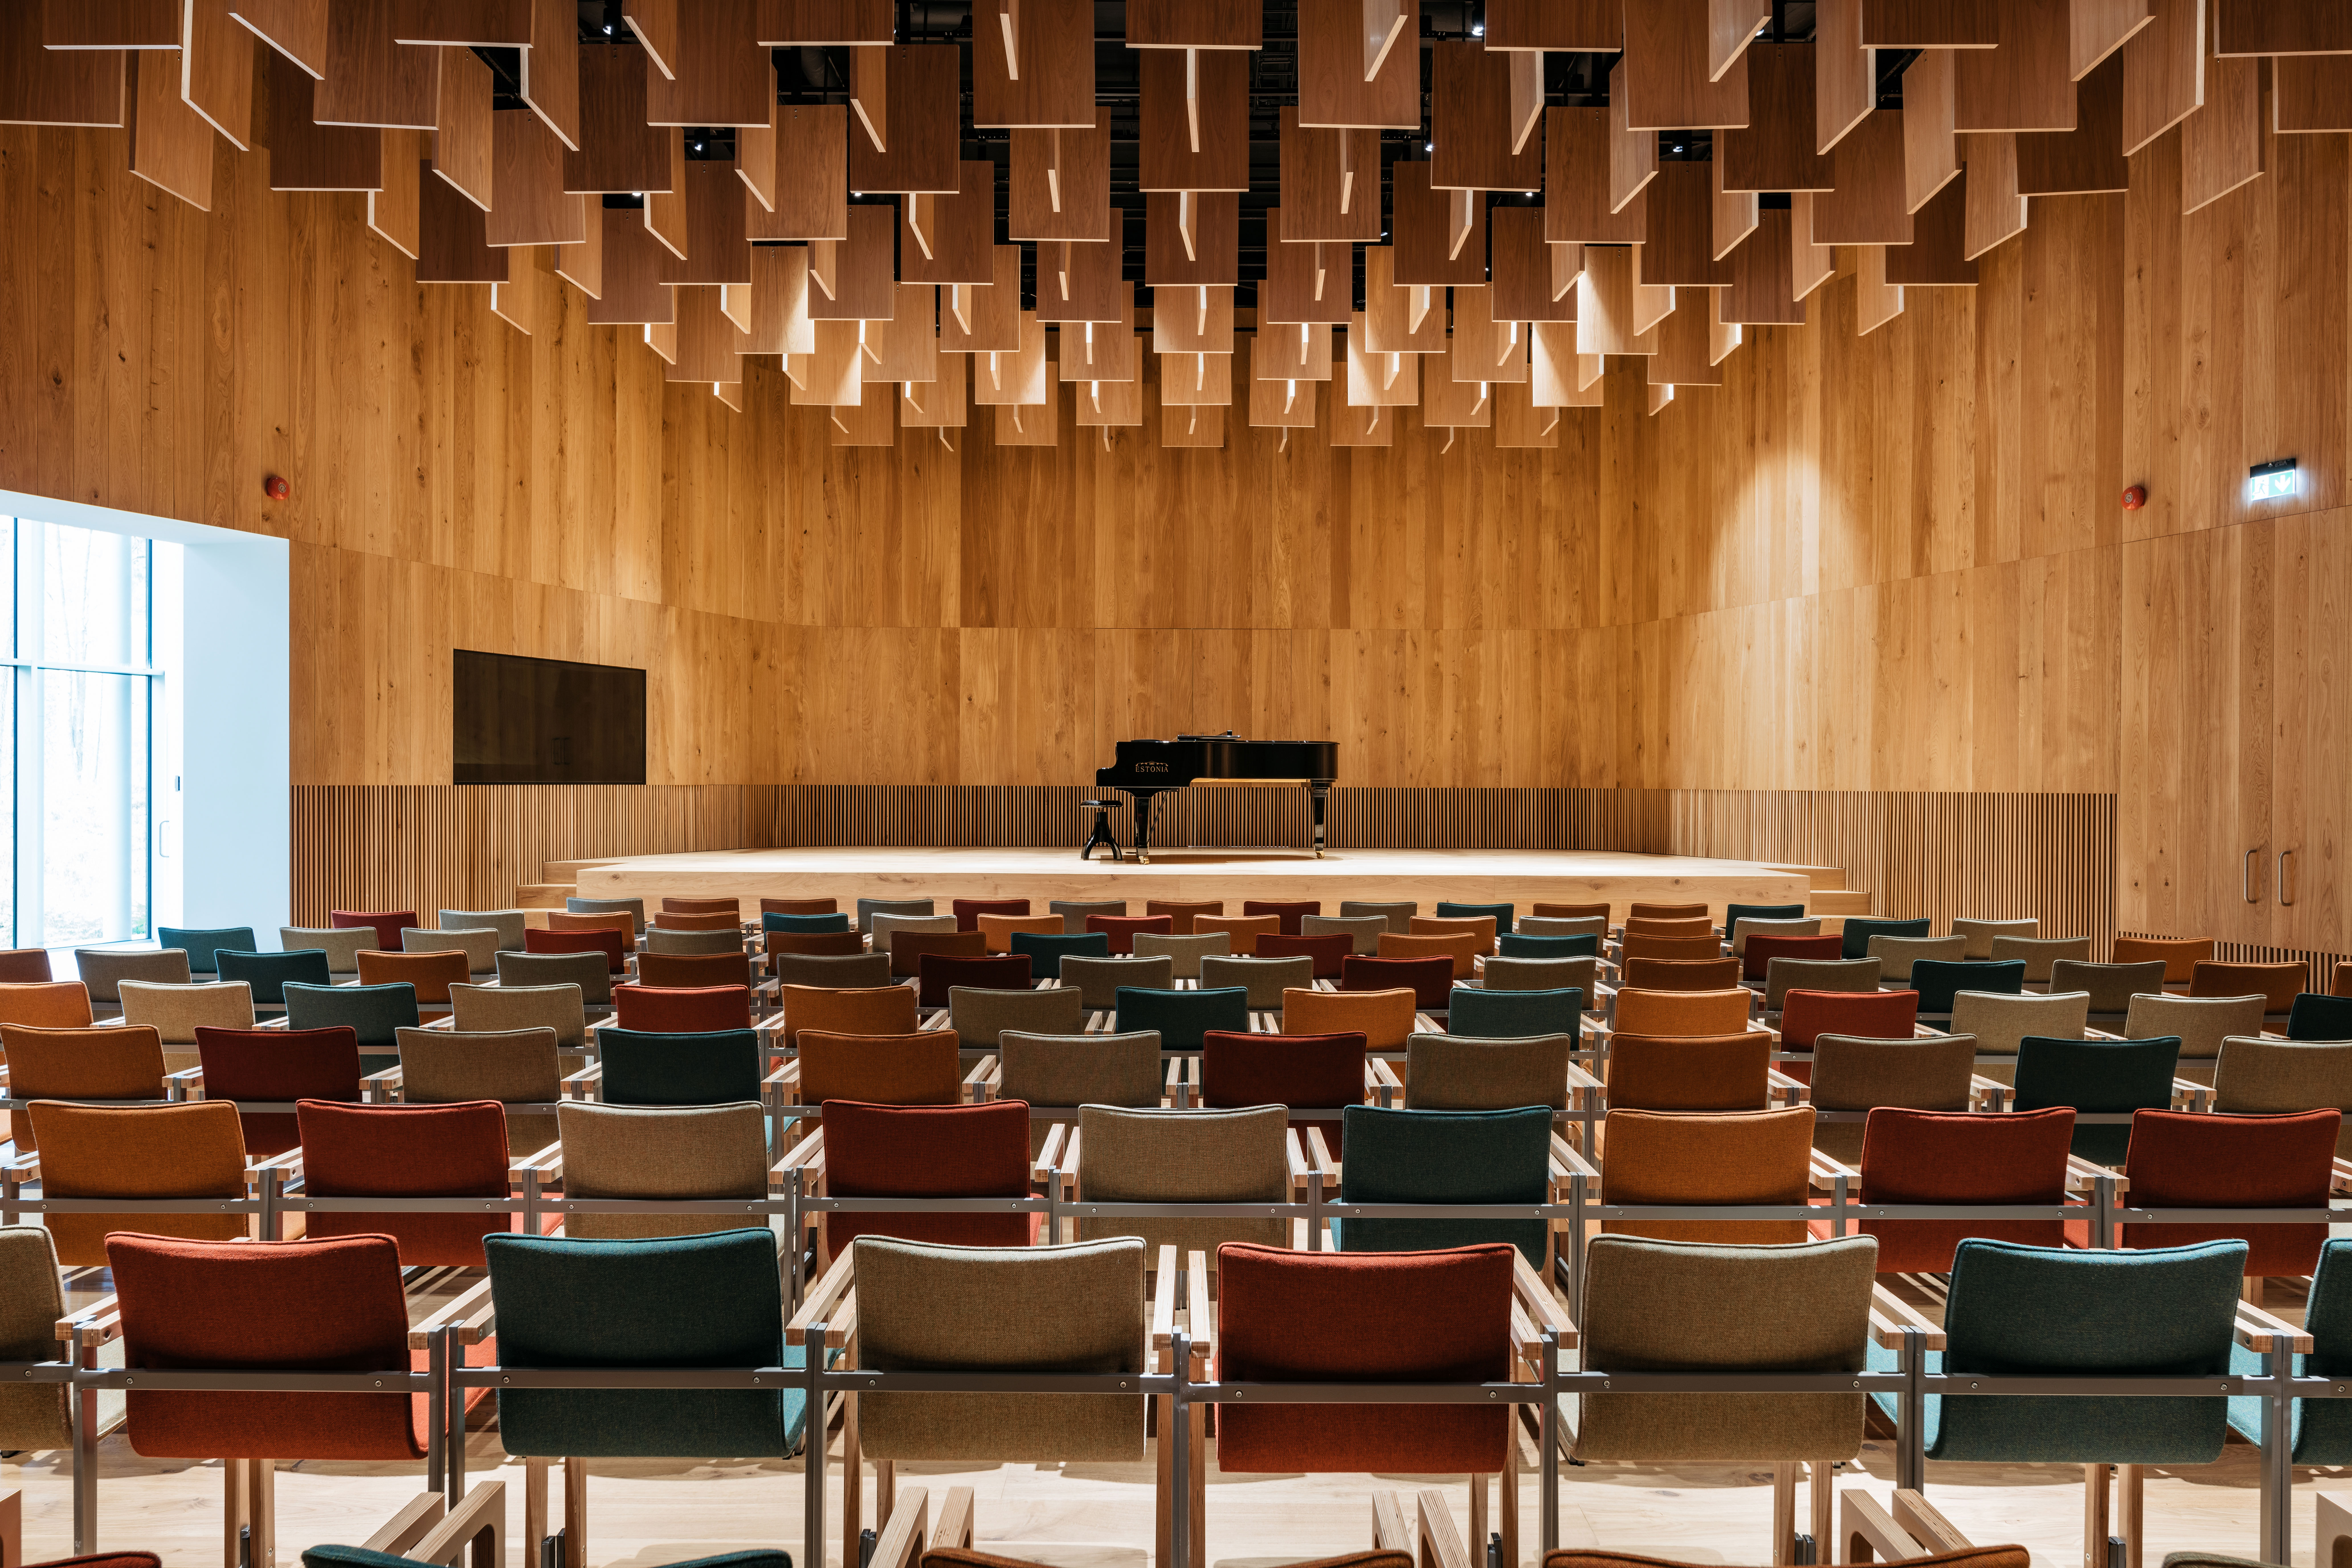 NORA chairs at the ARVO PART auditorium and concert hall in Estonia. Photo: Courtesy of Akaba.